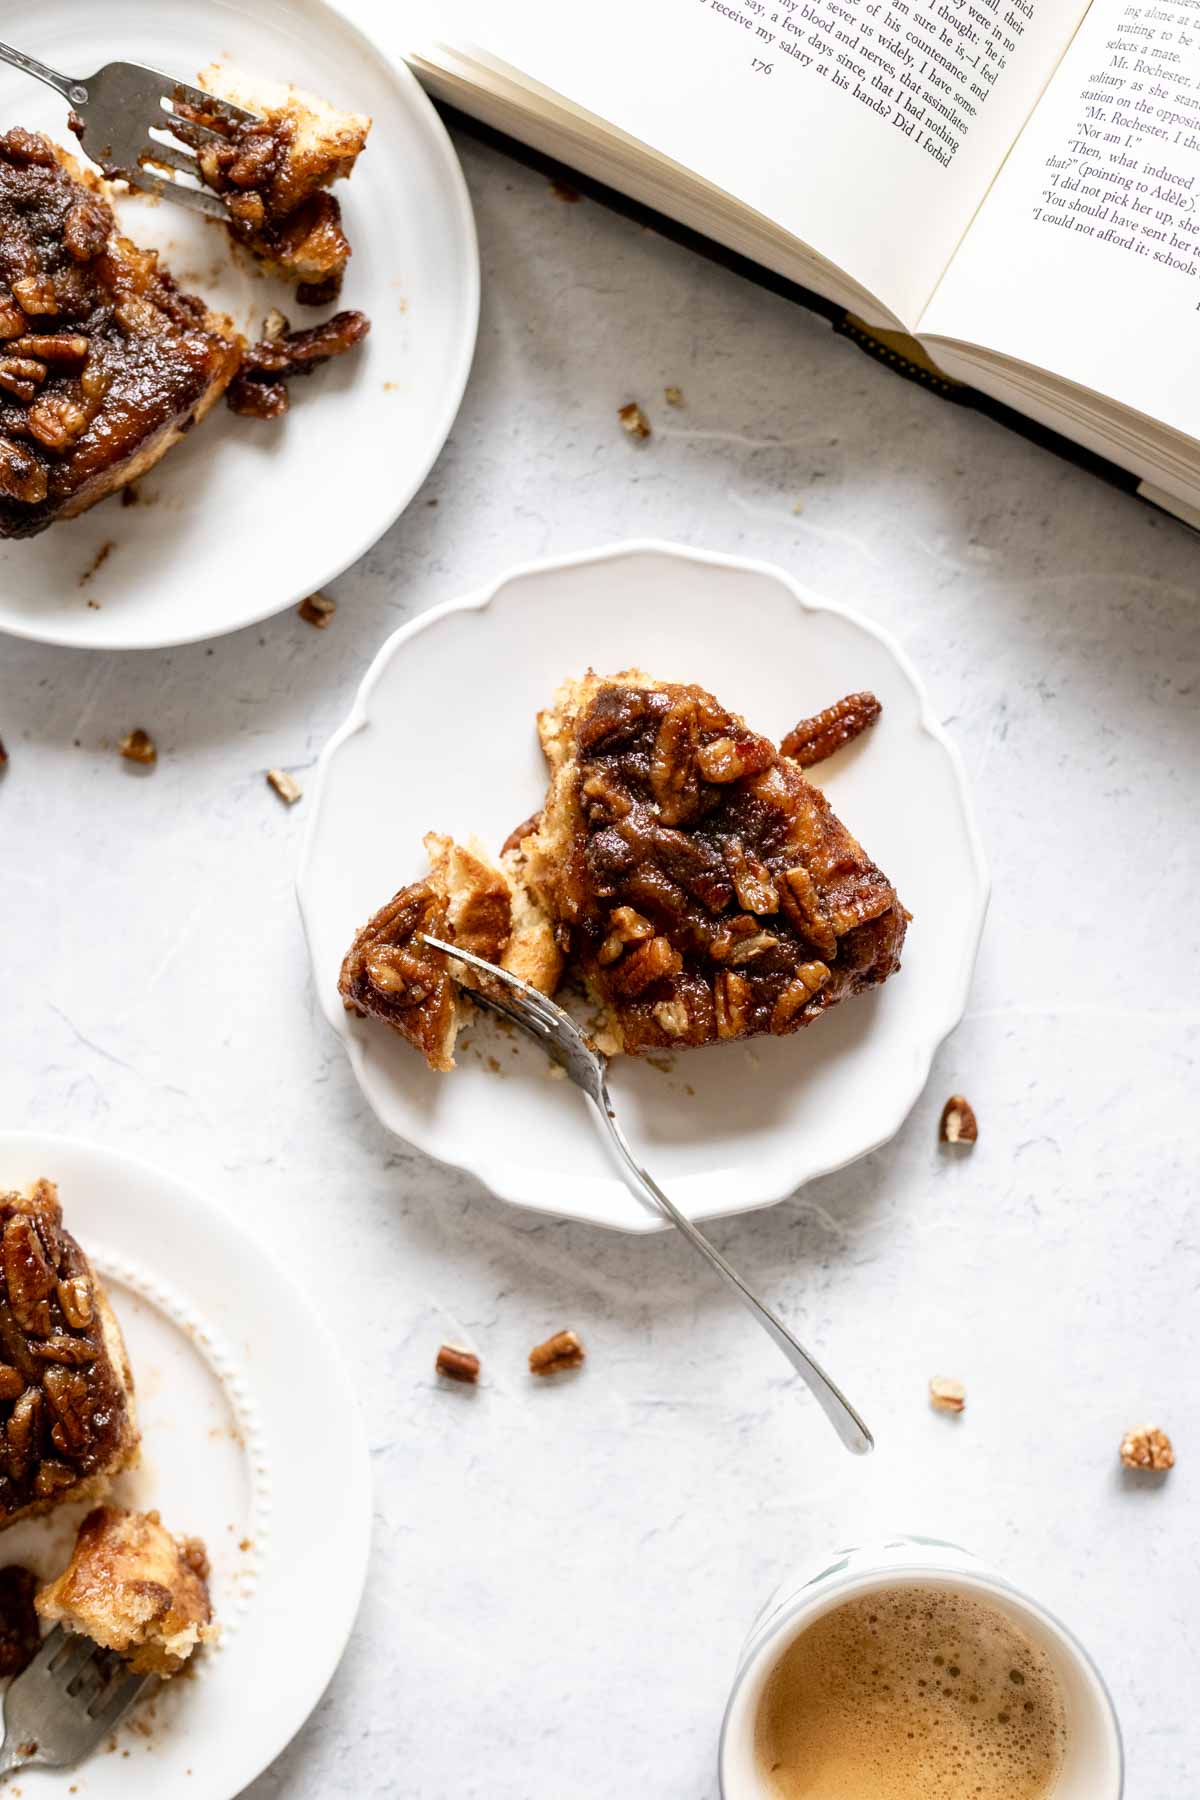 Homemade sticky bun with a bite taken out of it